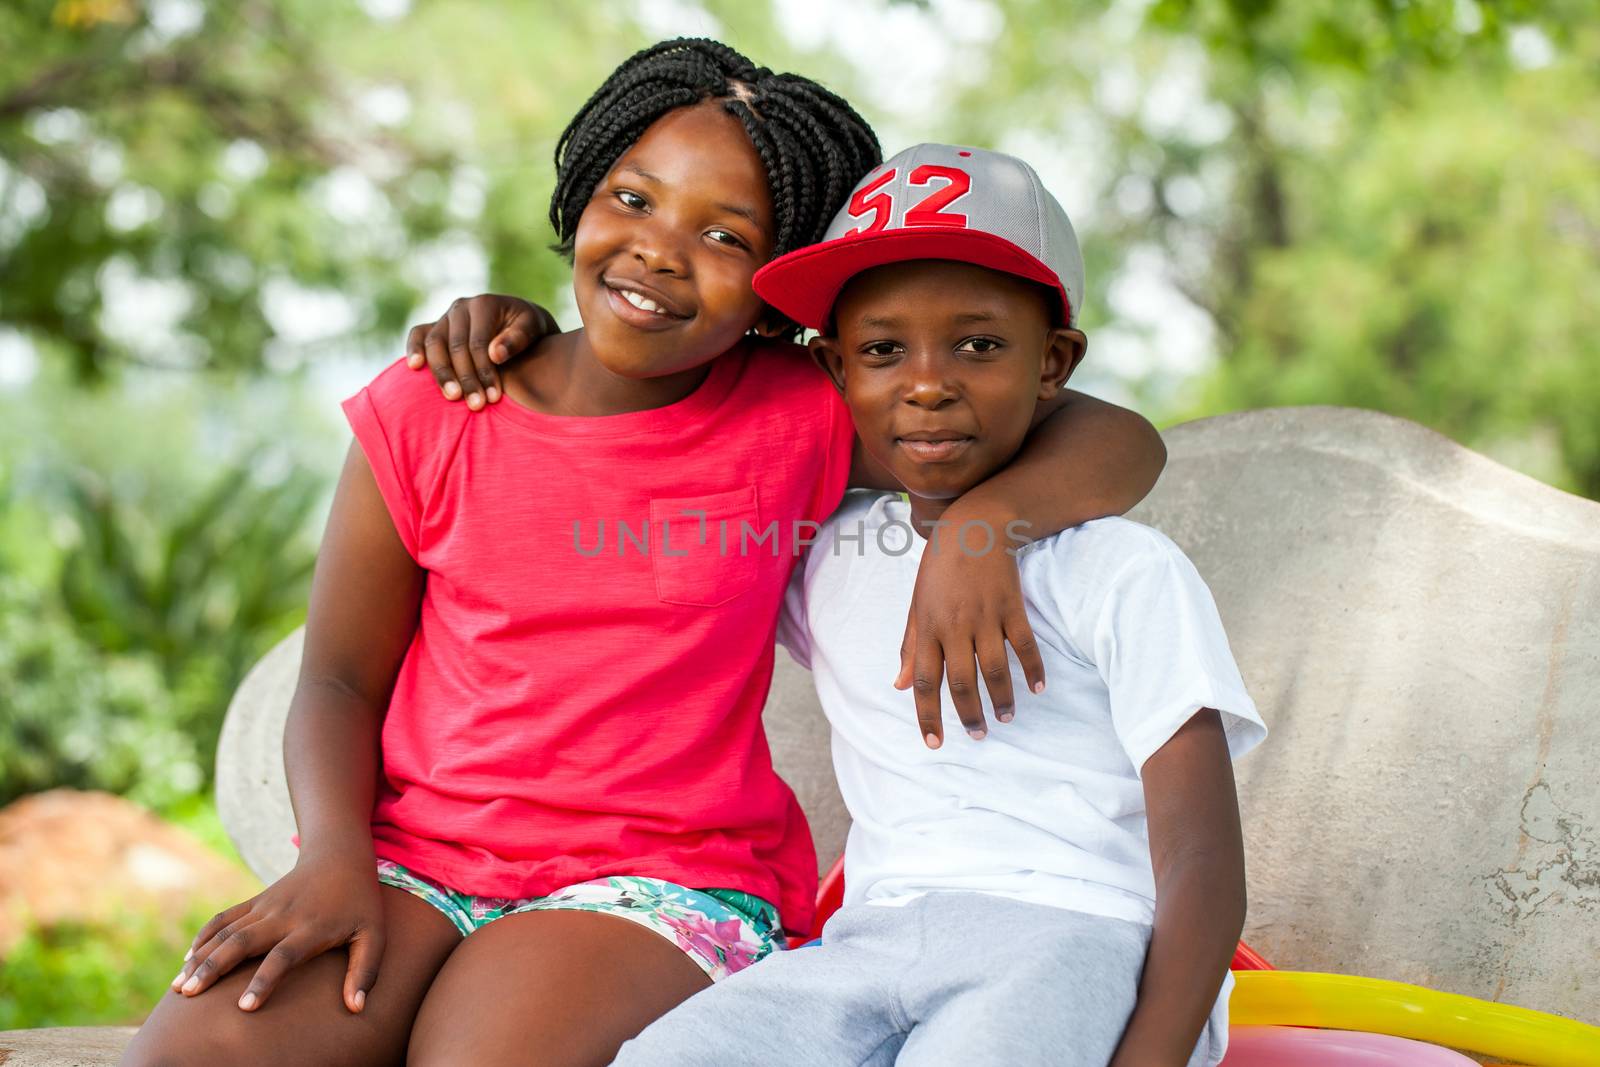 Close up portrait of two African kids sitting together on bench in park.